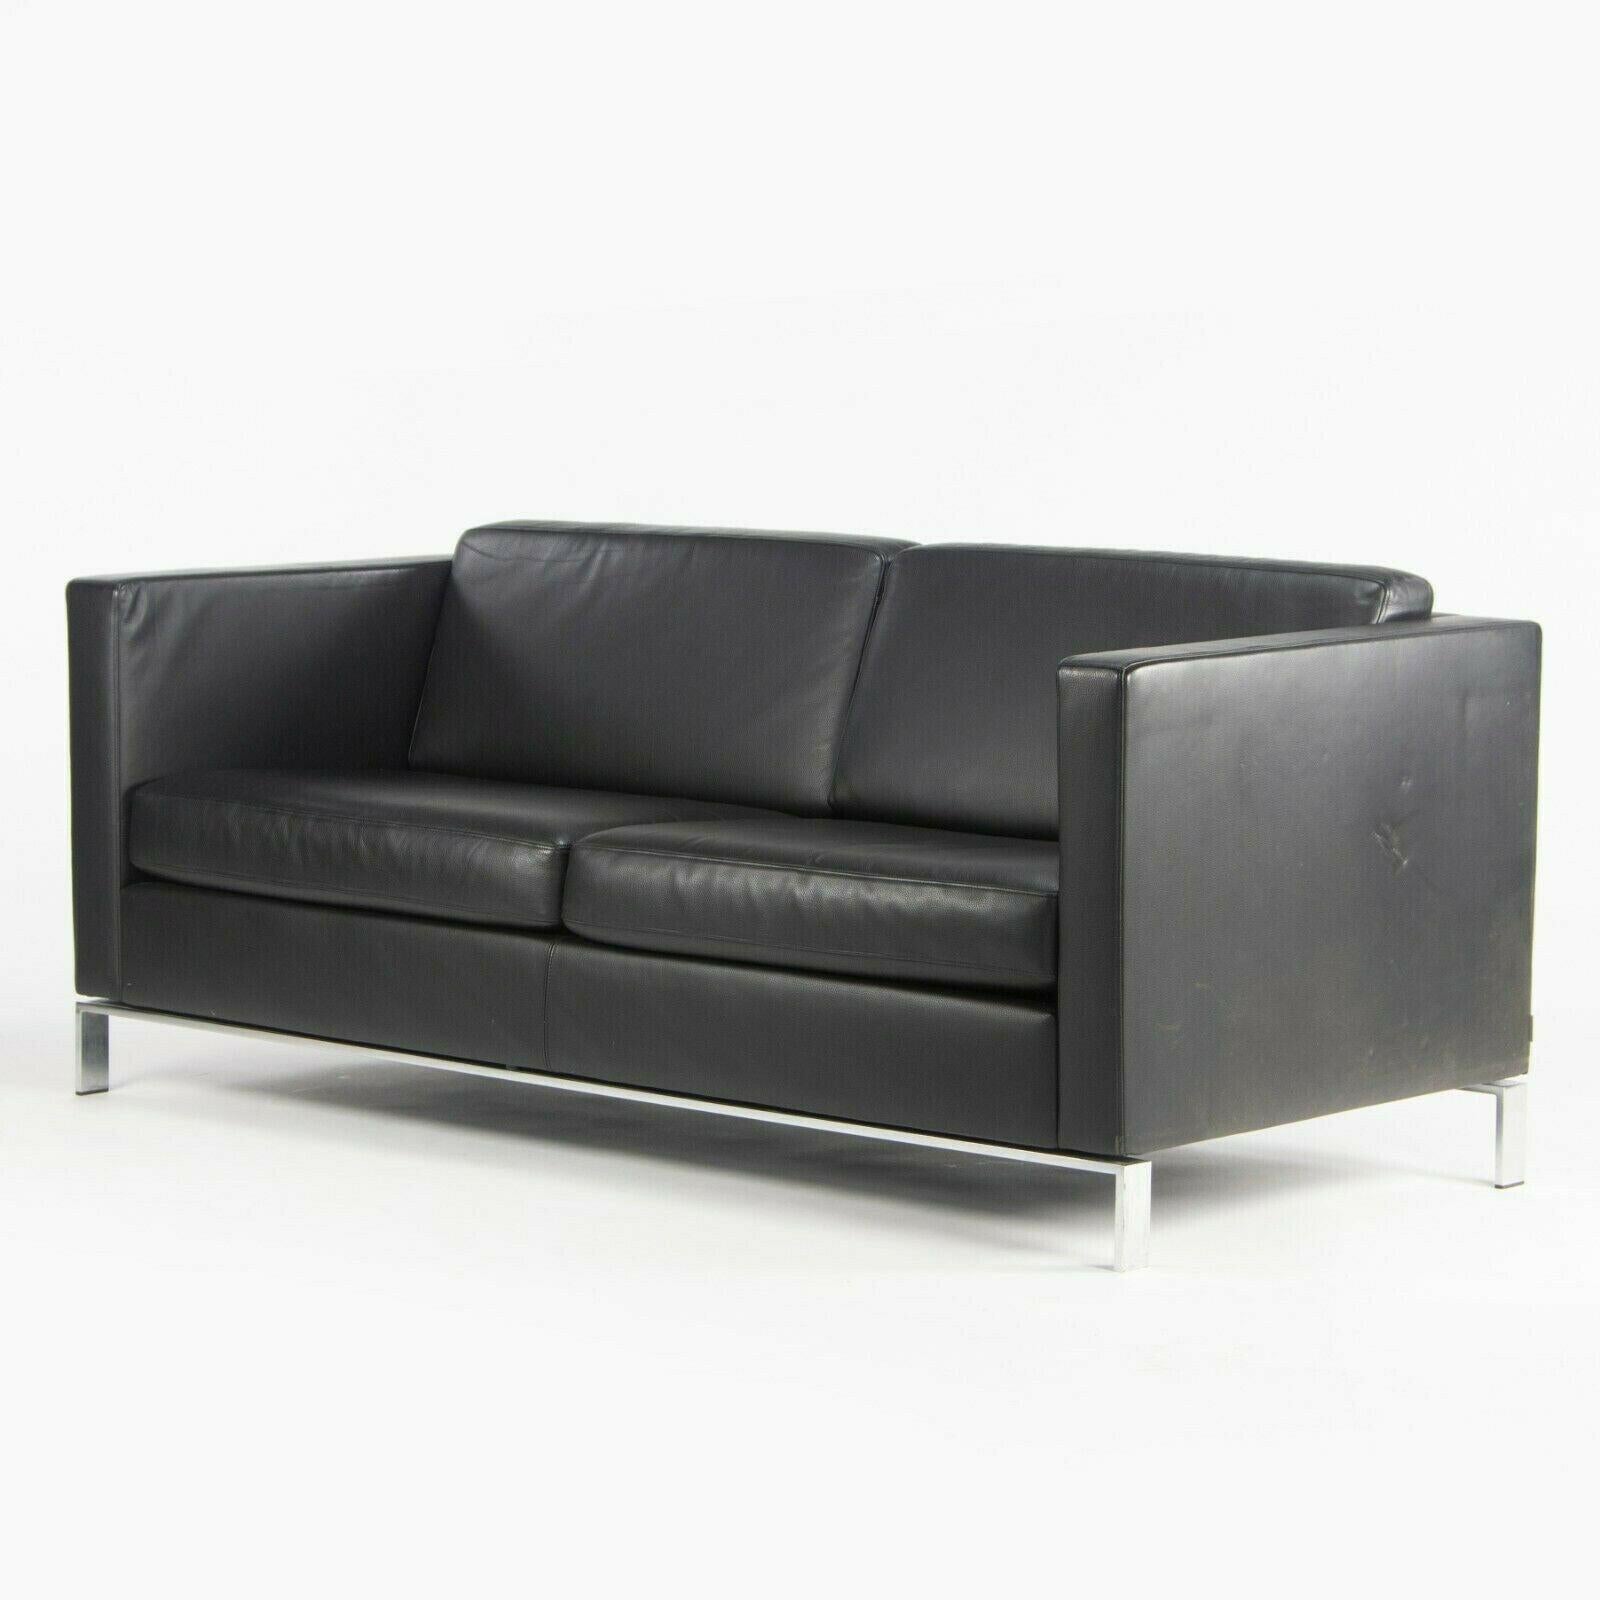 American Lord Norman Foster Model 500 Black Leather 2 Seat Settee Sofa for Walter Knoll For Sale